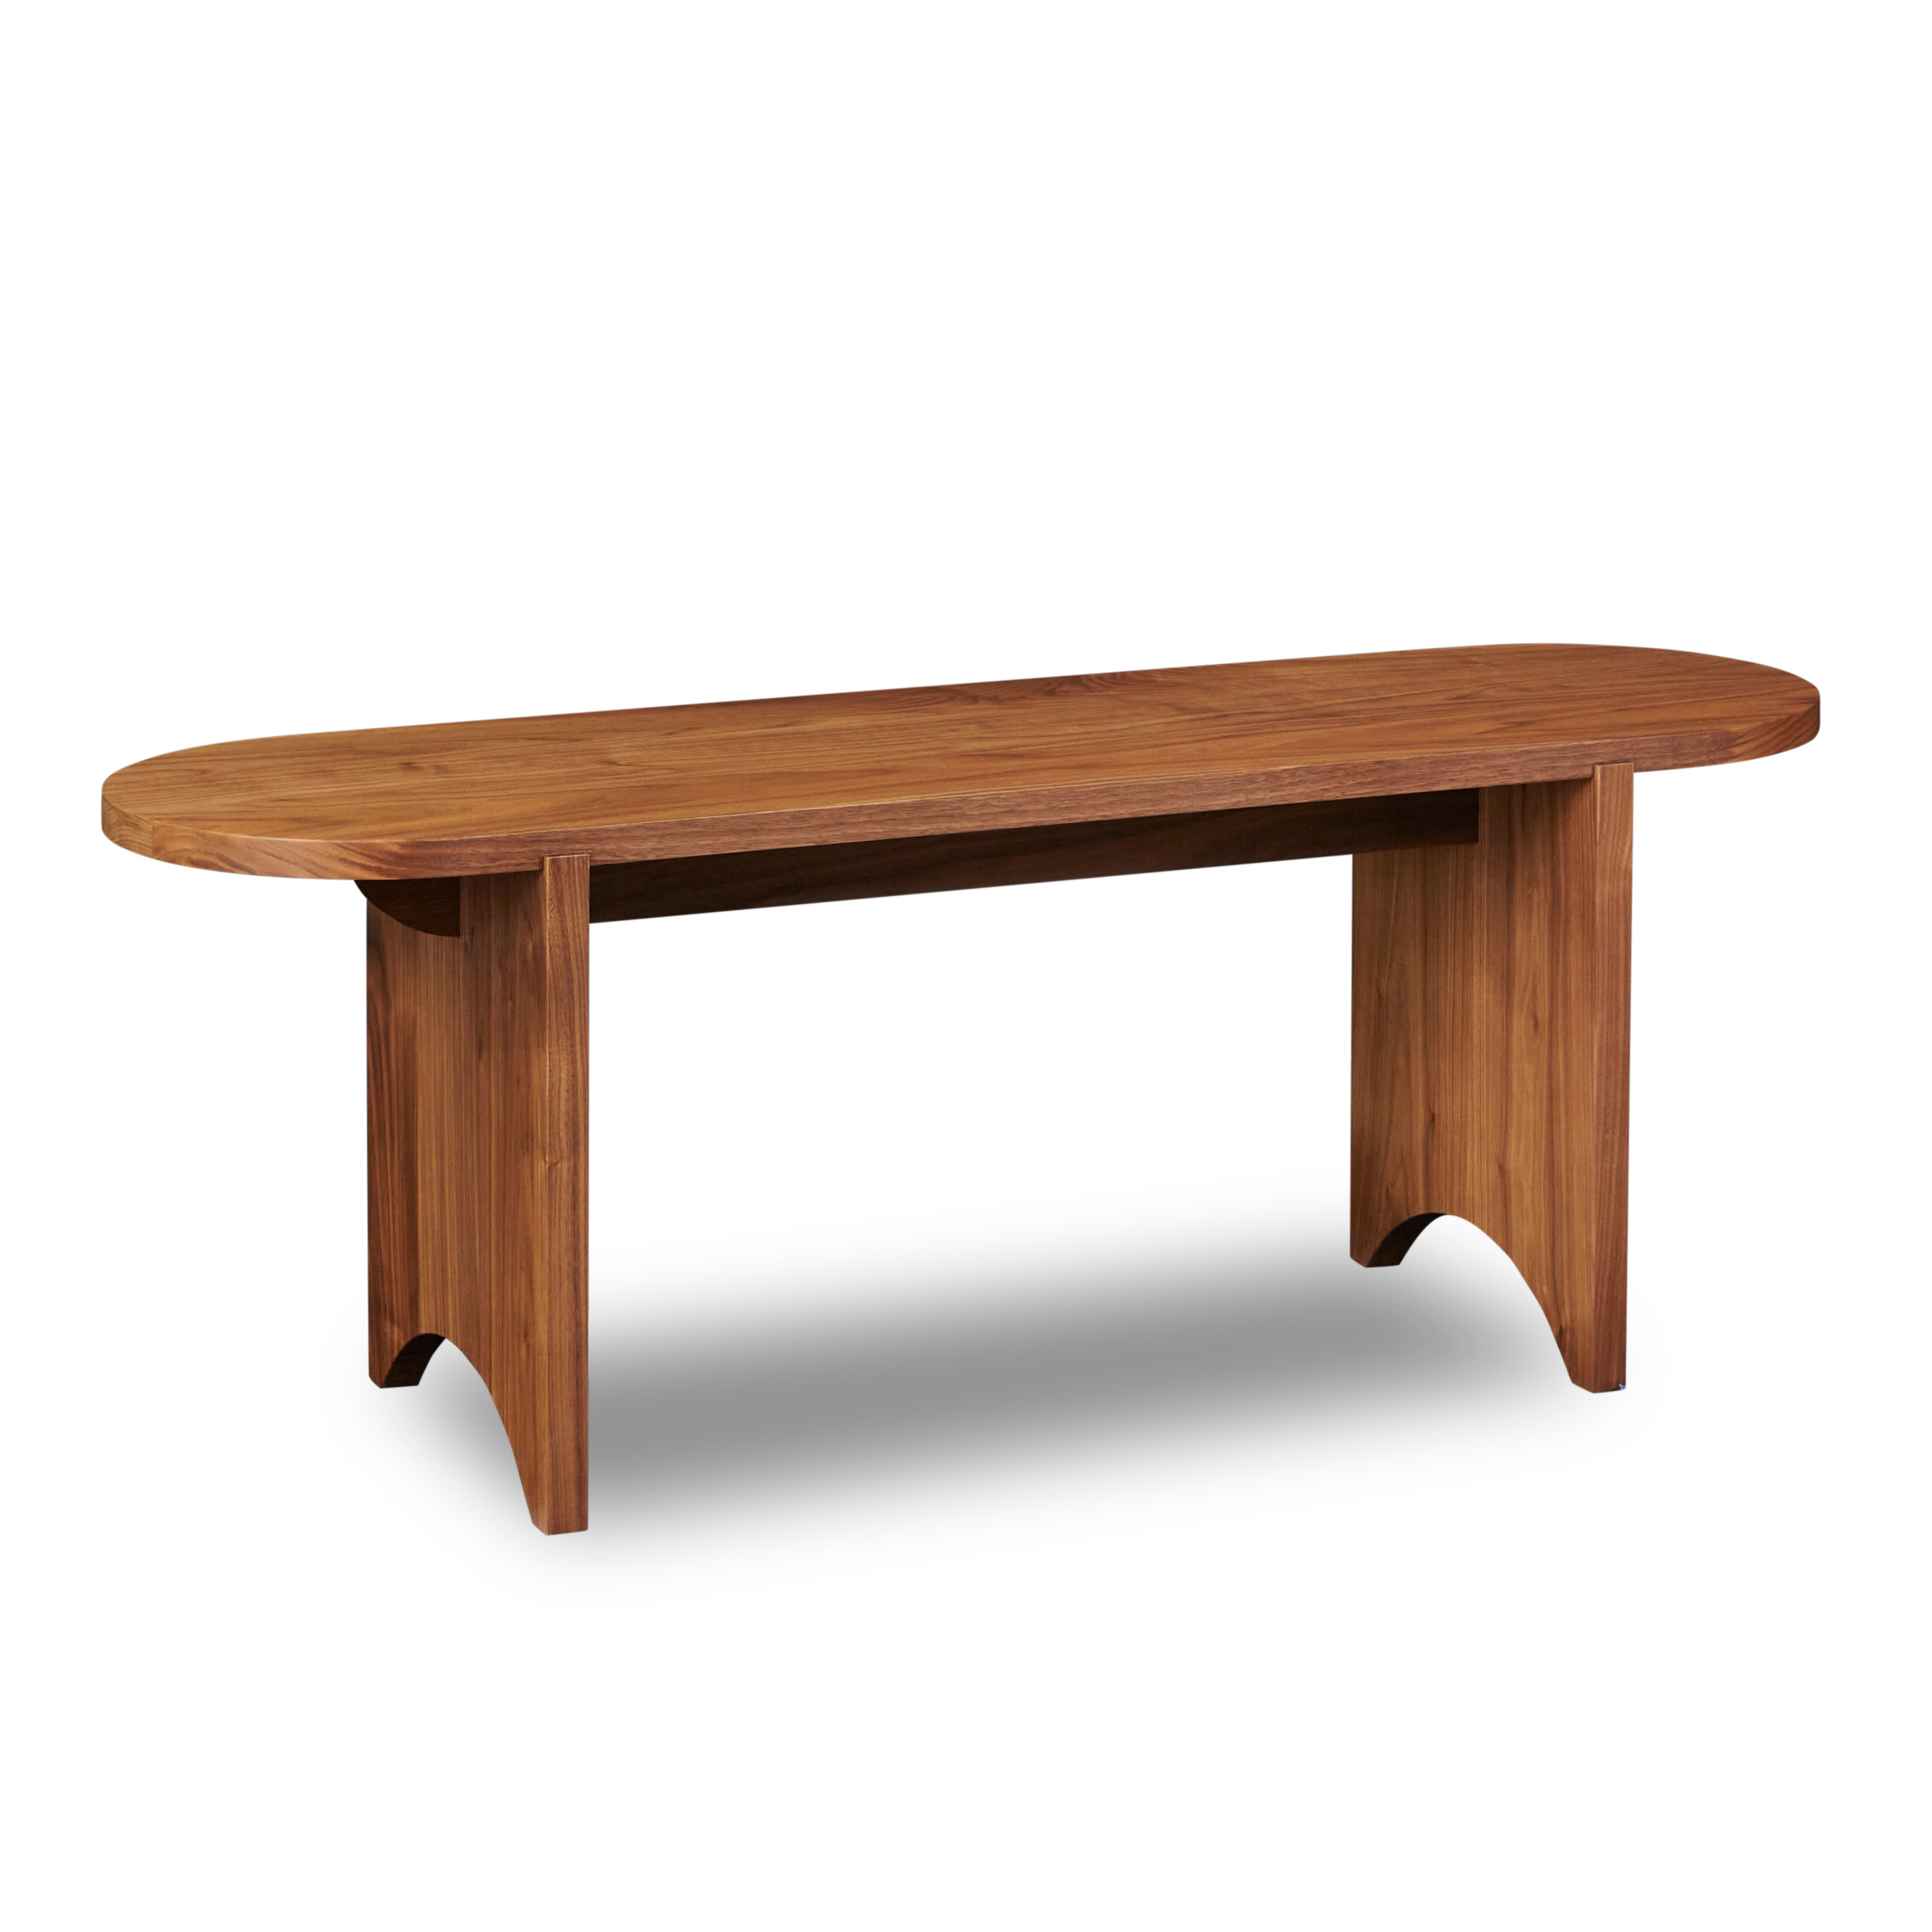 Modern walnut bench with rounded edges and legs from Chilton Furniture in Maine